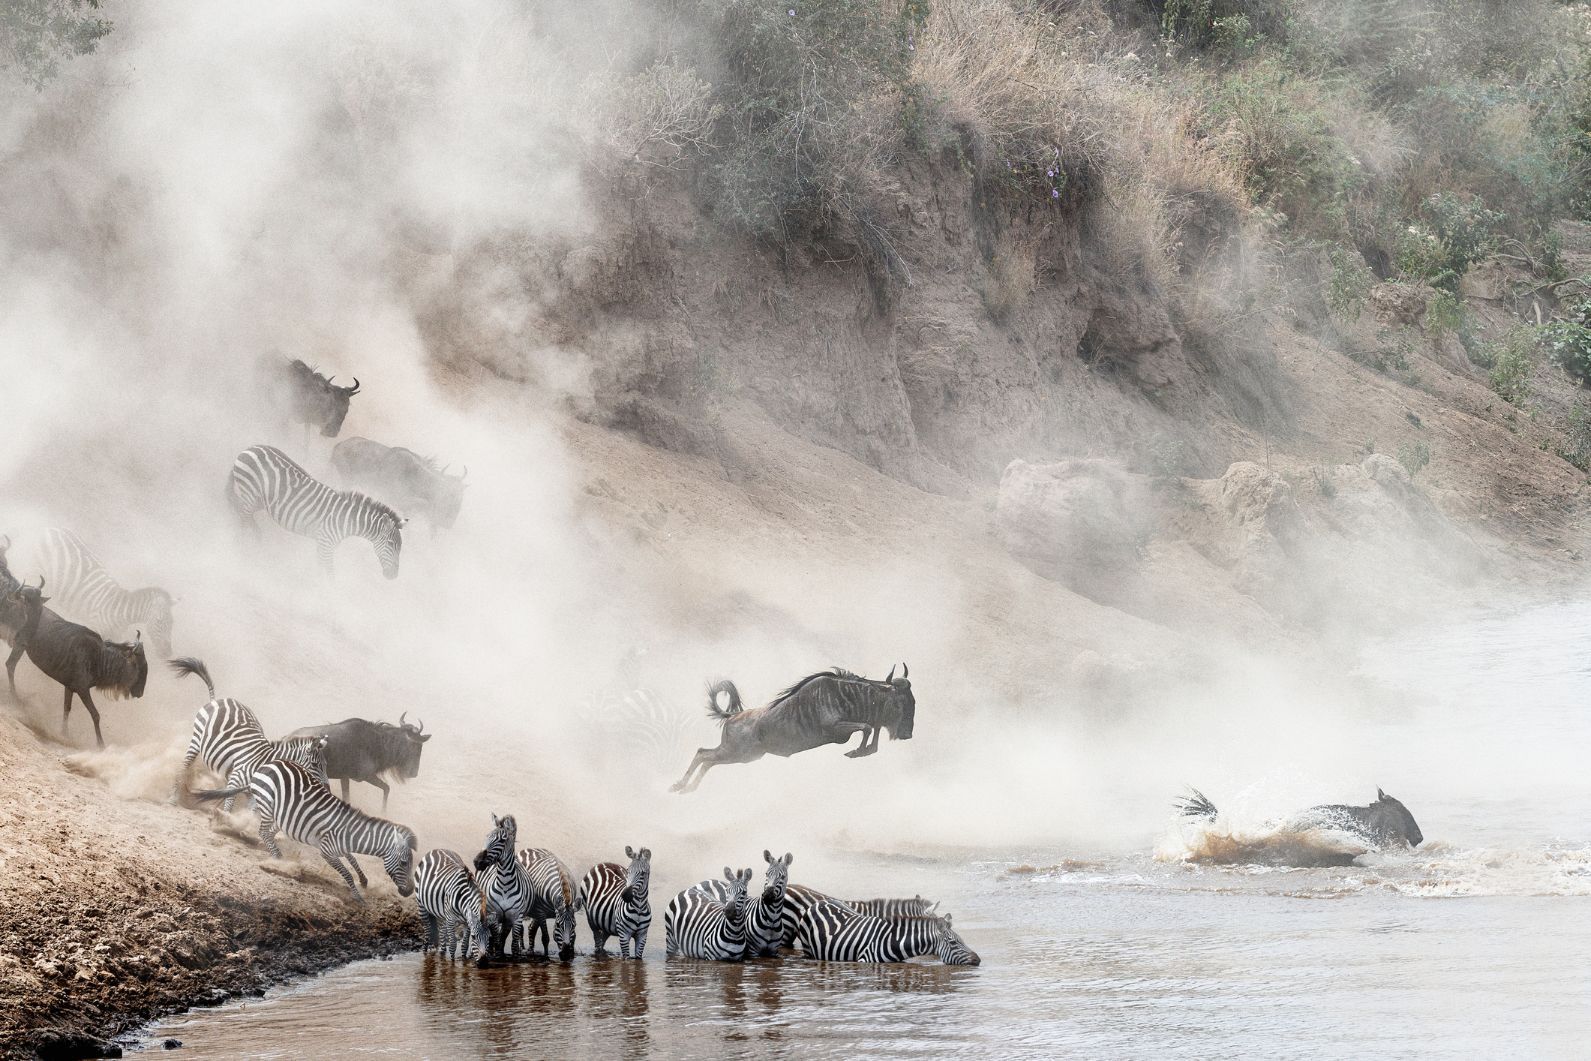 Wildebeest and zebras taking part in the Great Migration across the Serengeti. Photo: Getty.